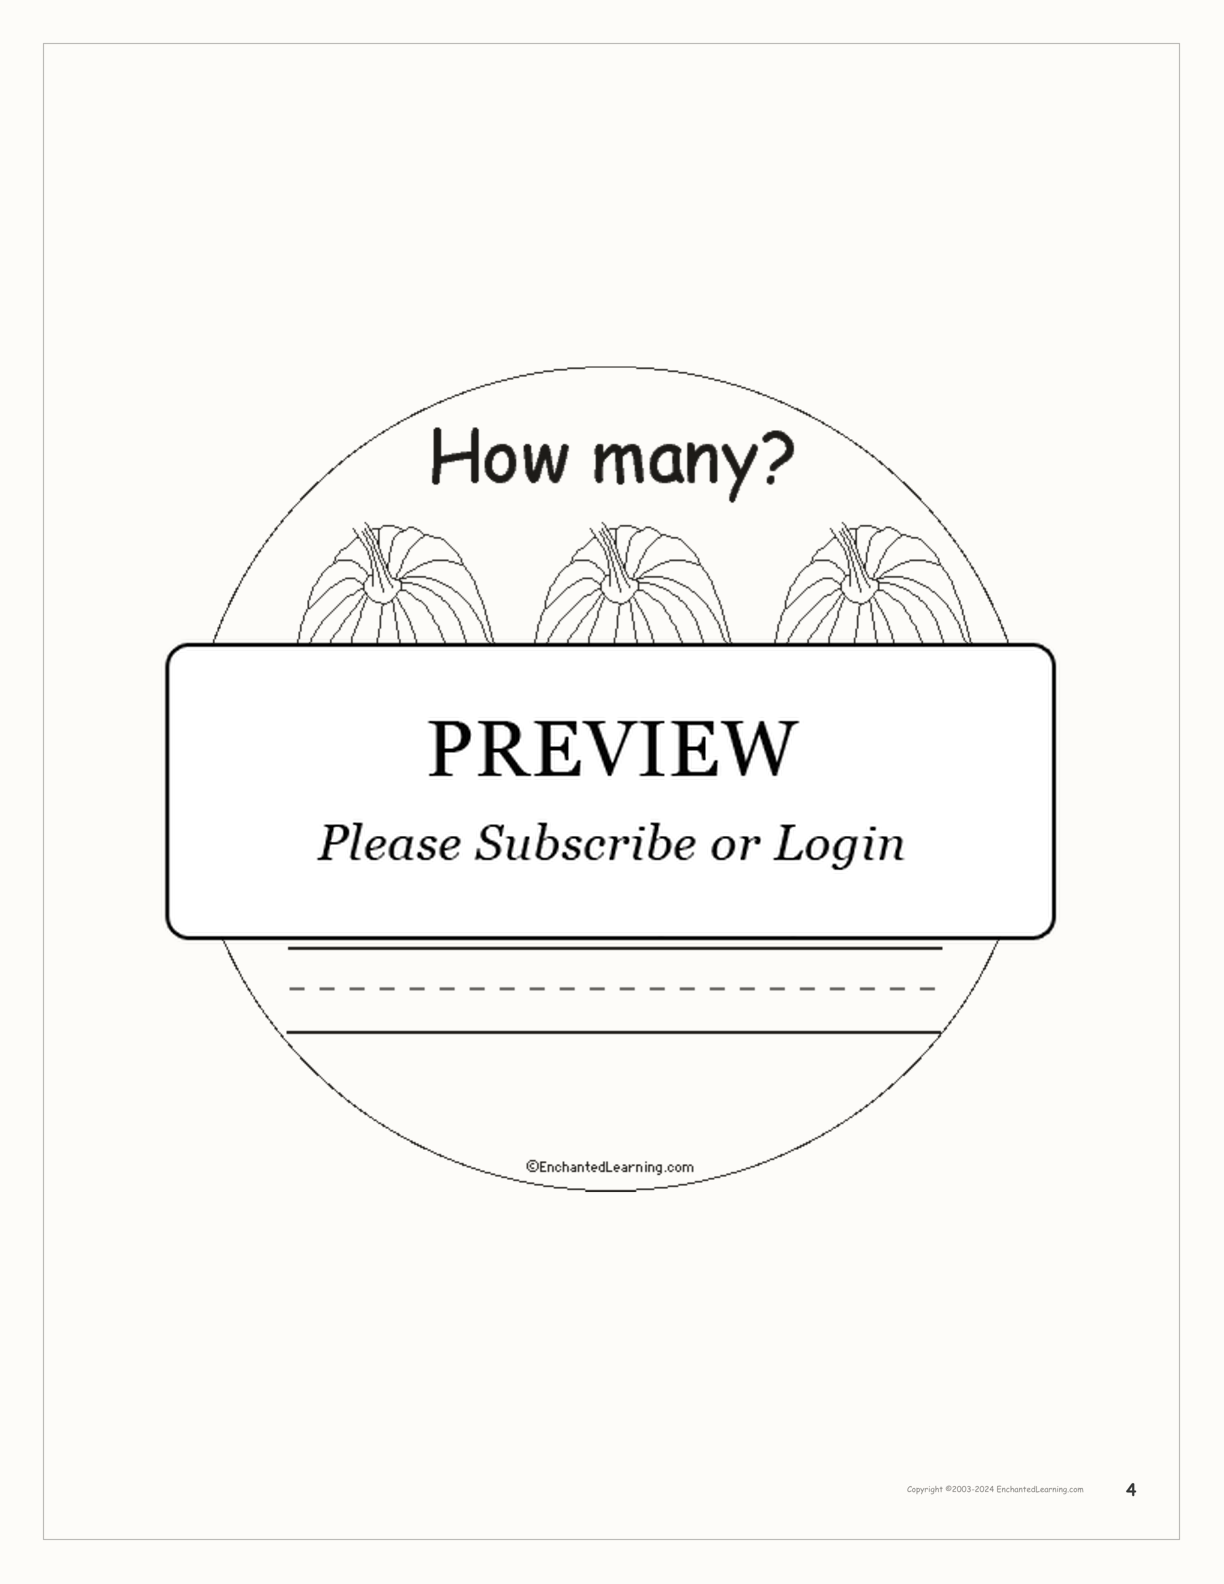 How Many Pumpkins? interactive printout page 4